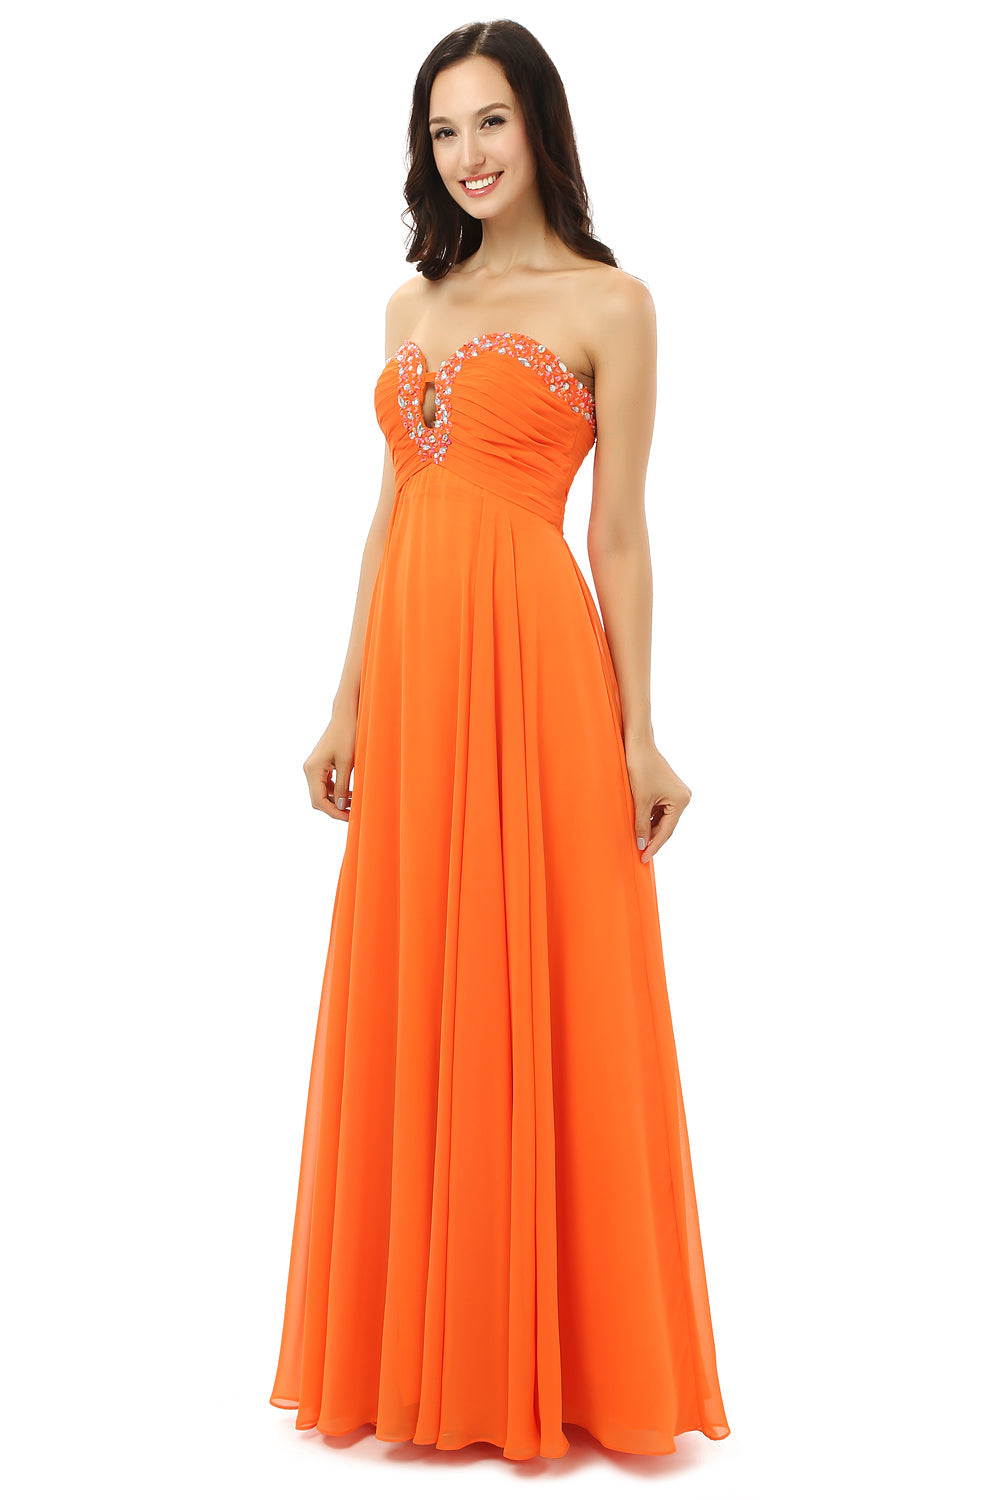 Bridesmaids Dresses Gold, Orange Chiffon Cut Out Sweetheart With Pleats Bridesmaid Dresses